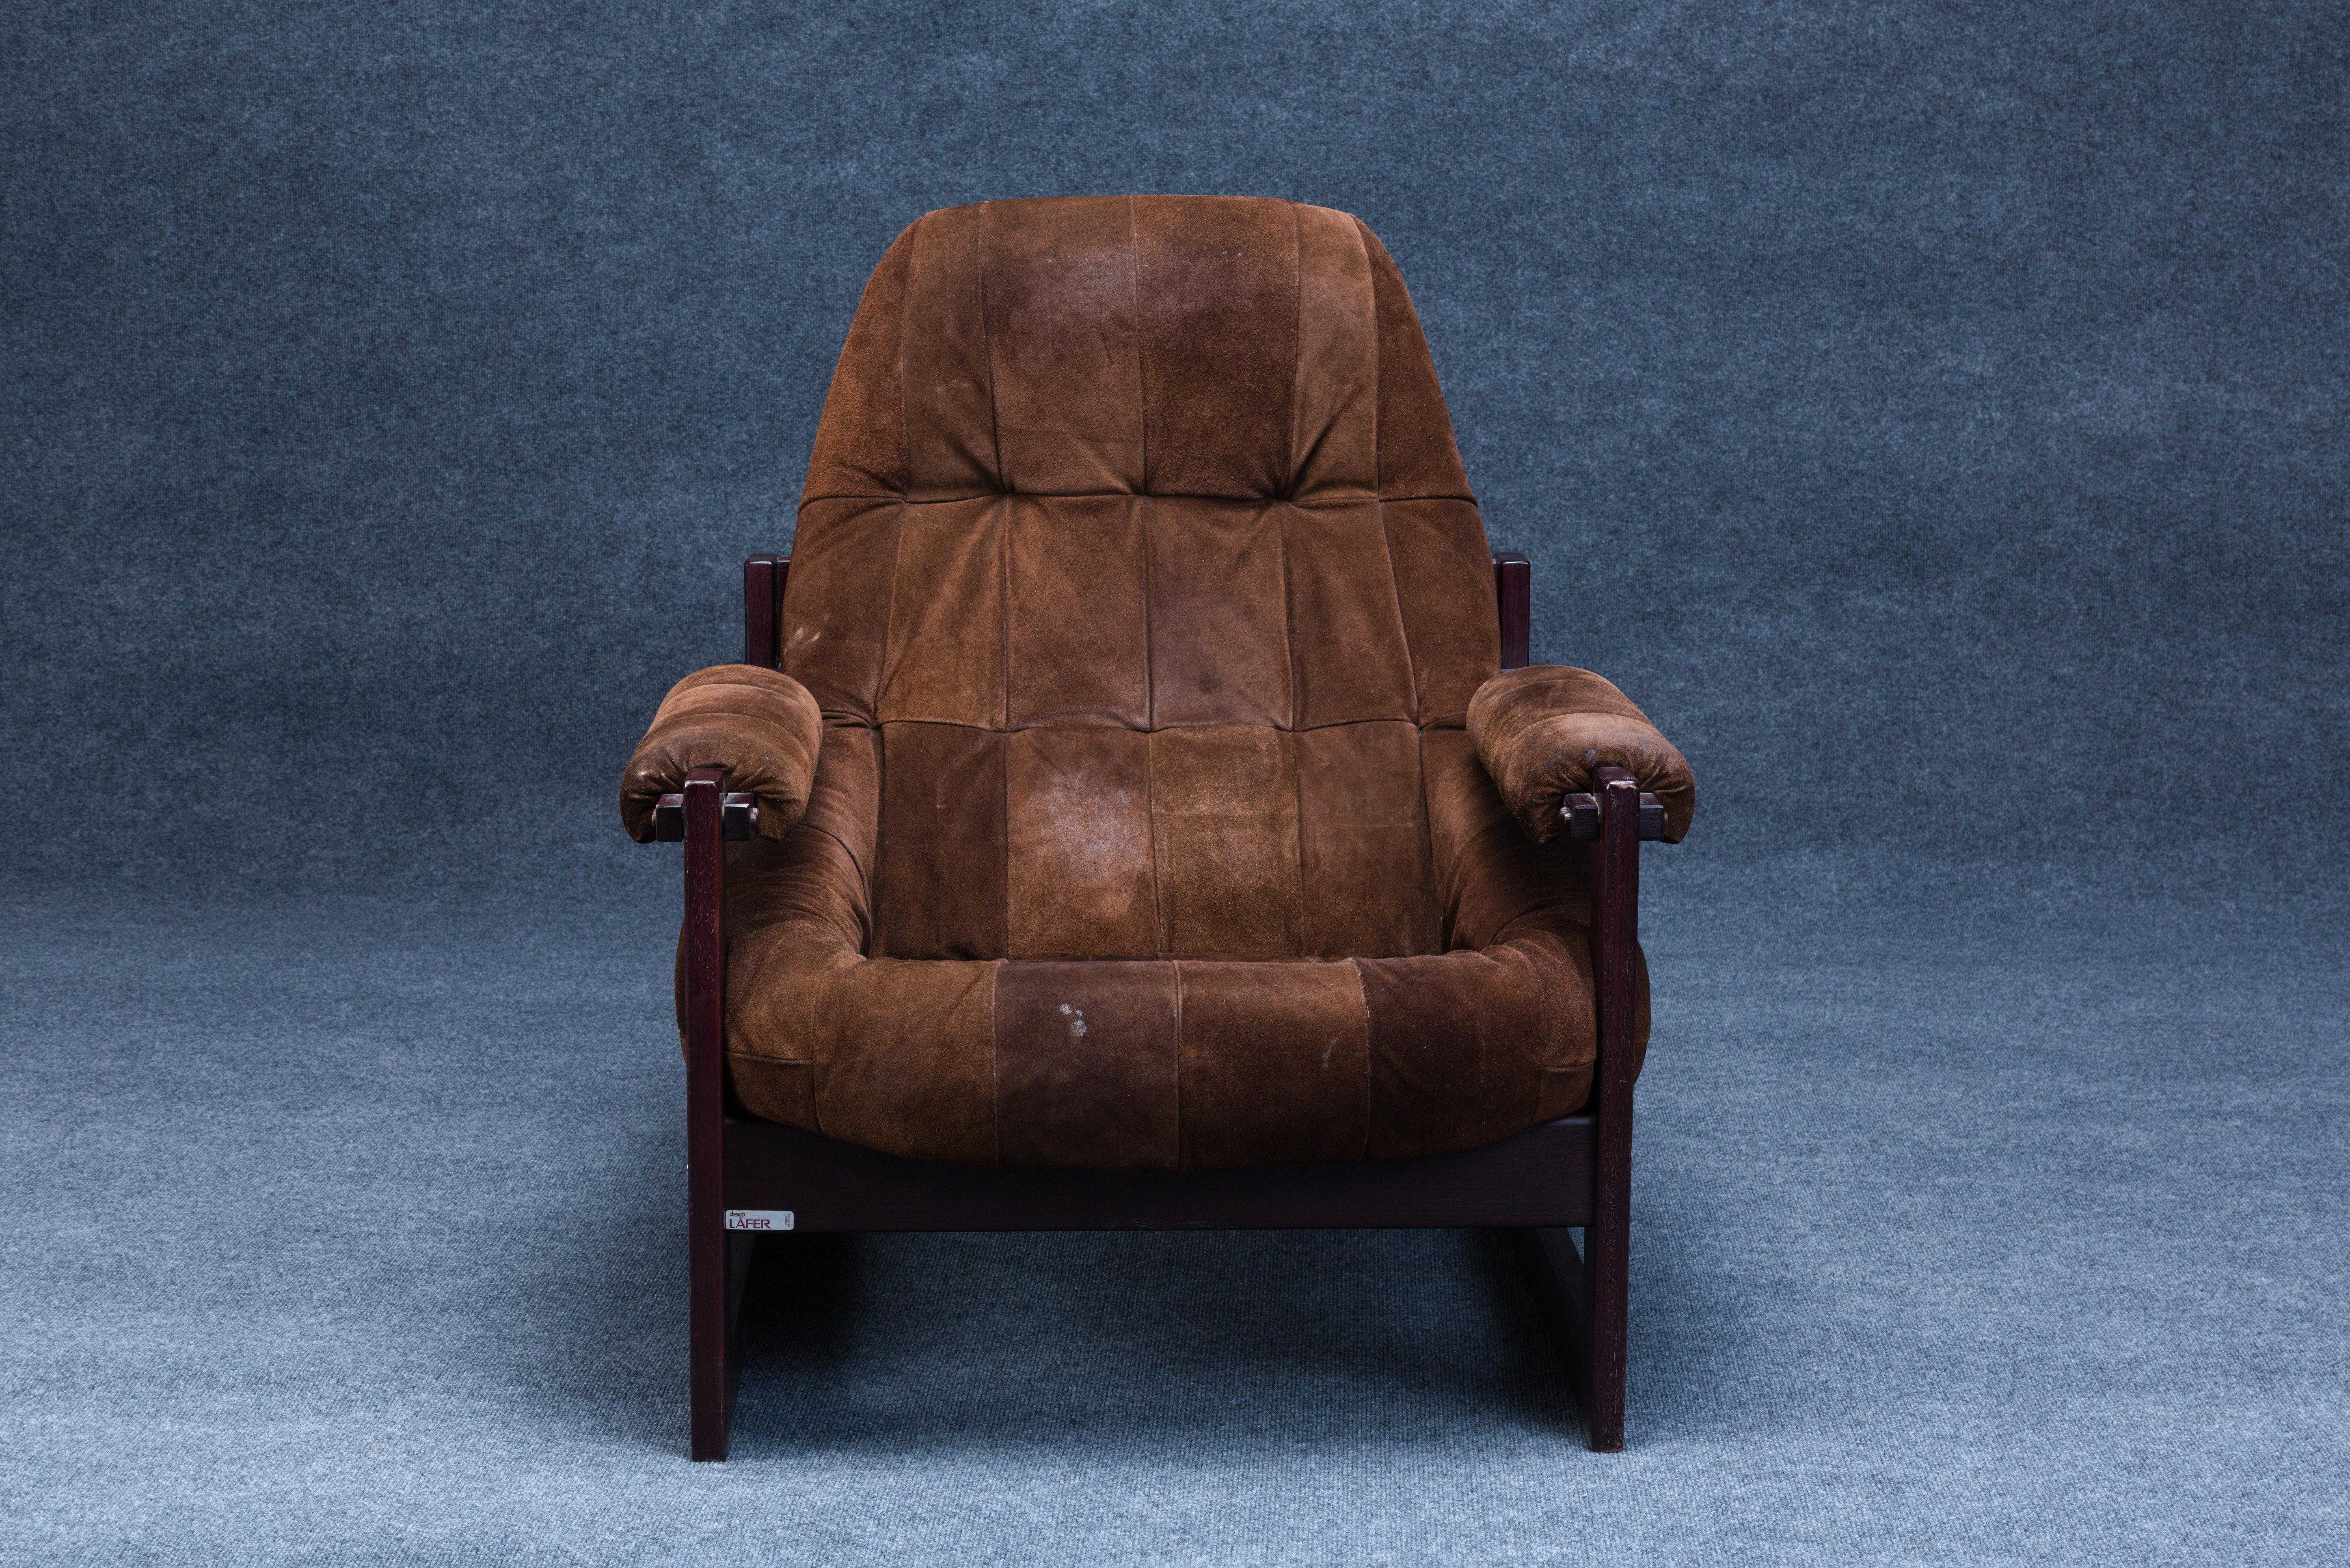 Brazilian Mid-Century Modern Armchair/Ottoman by Percival Lafer in Suede Leather For Sale 7